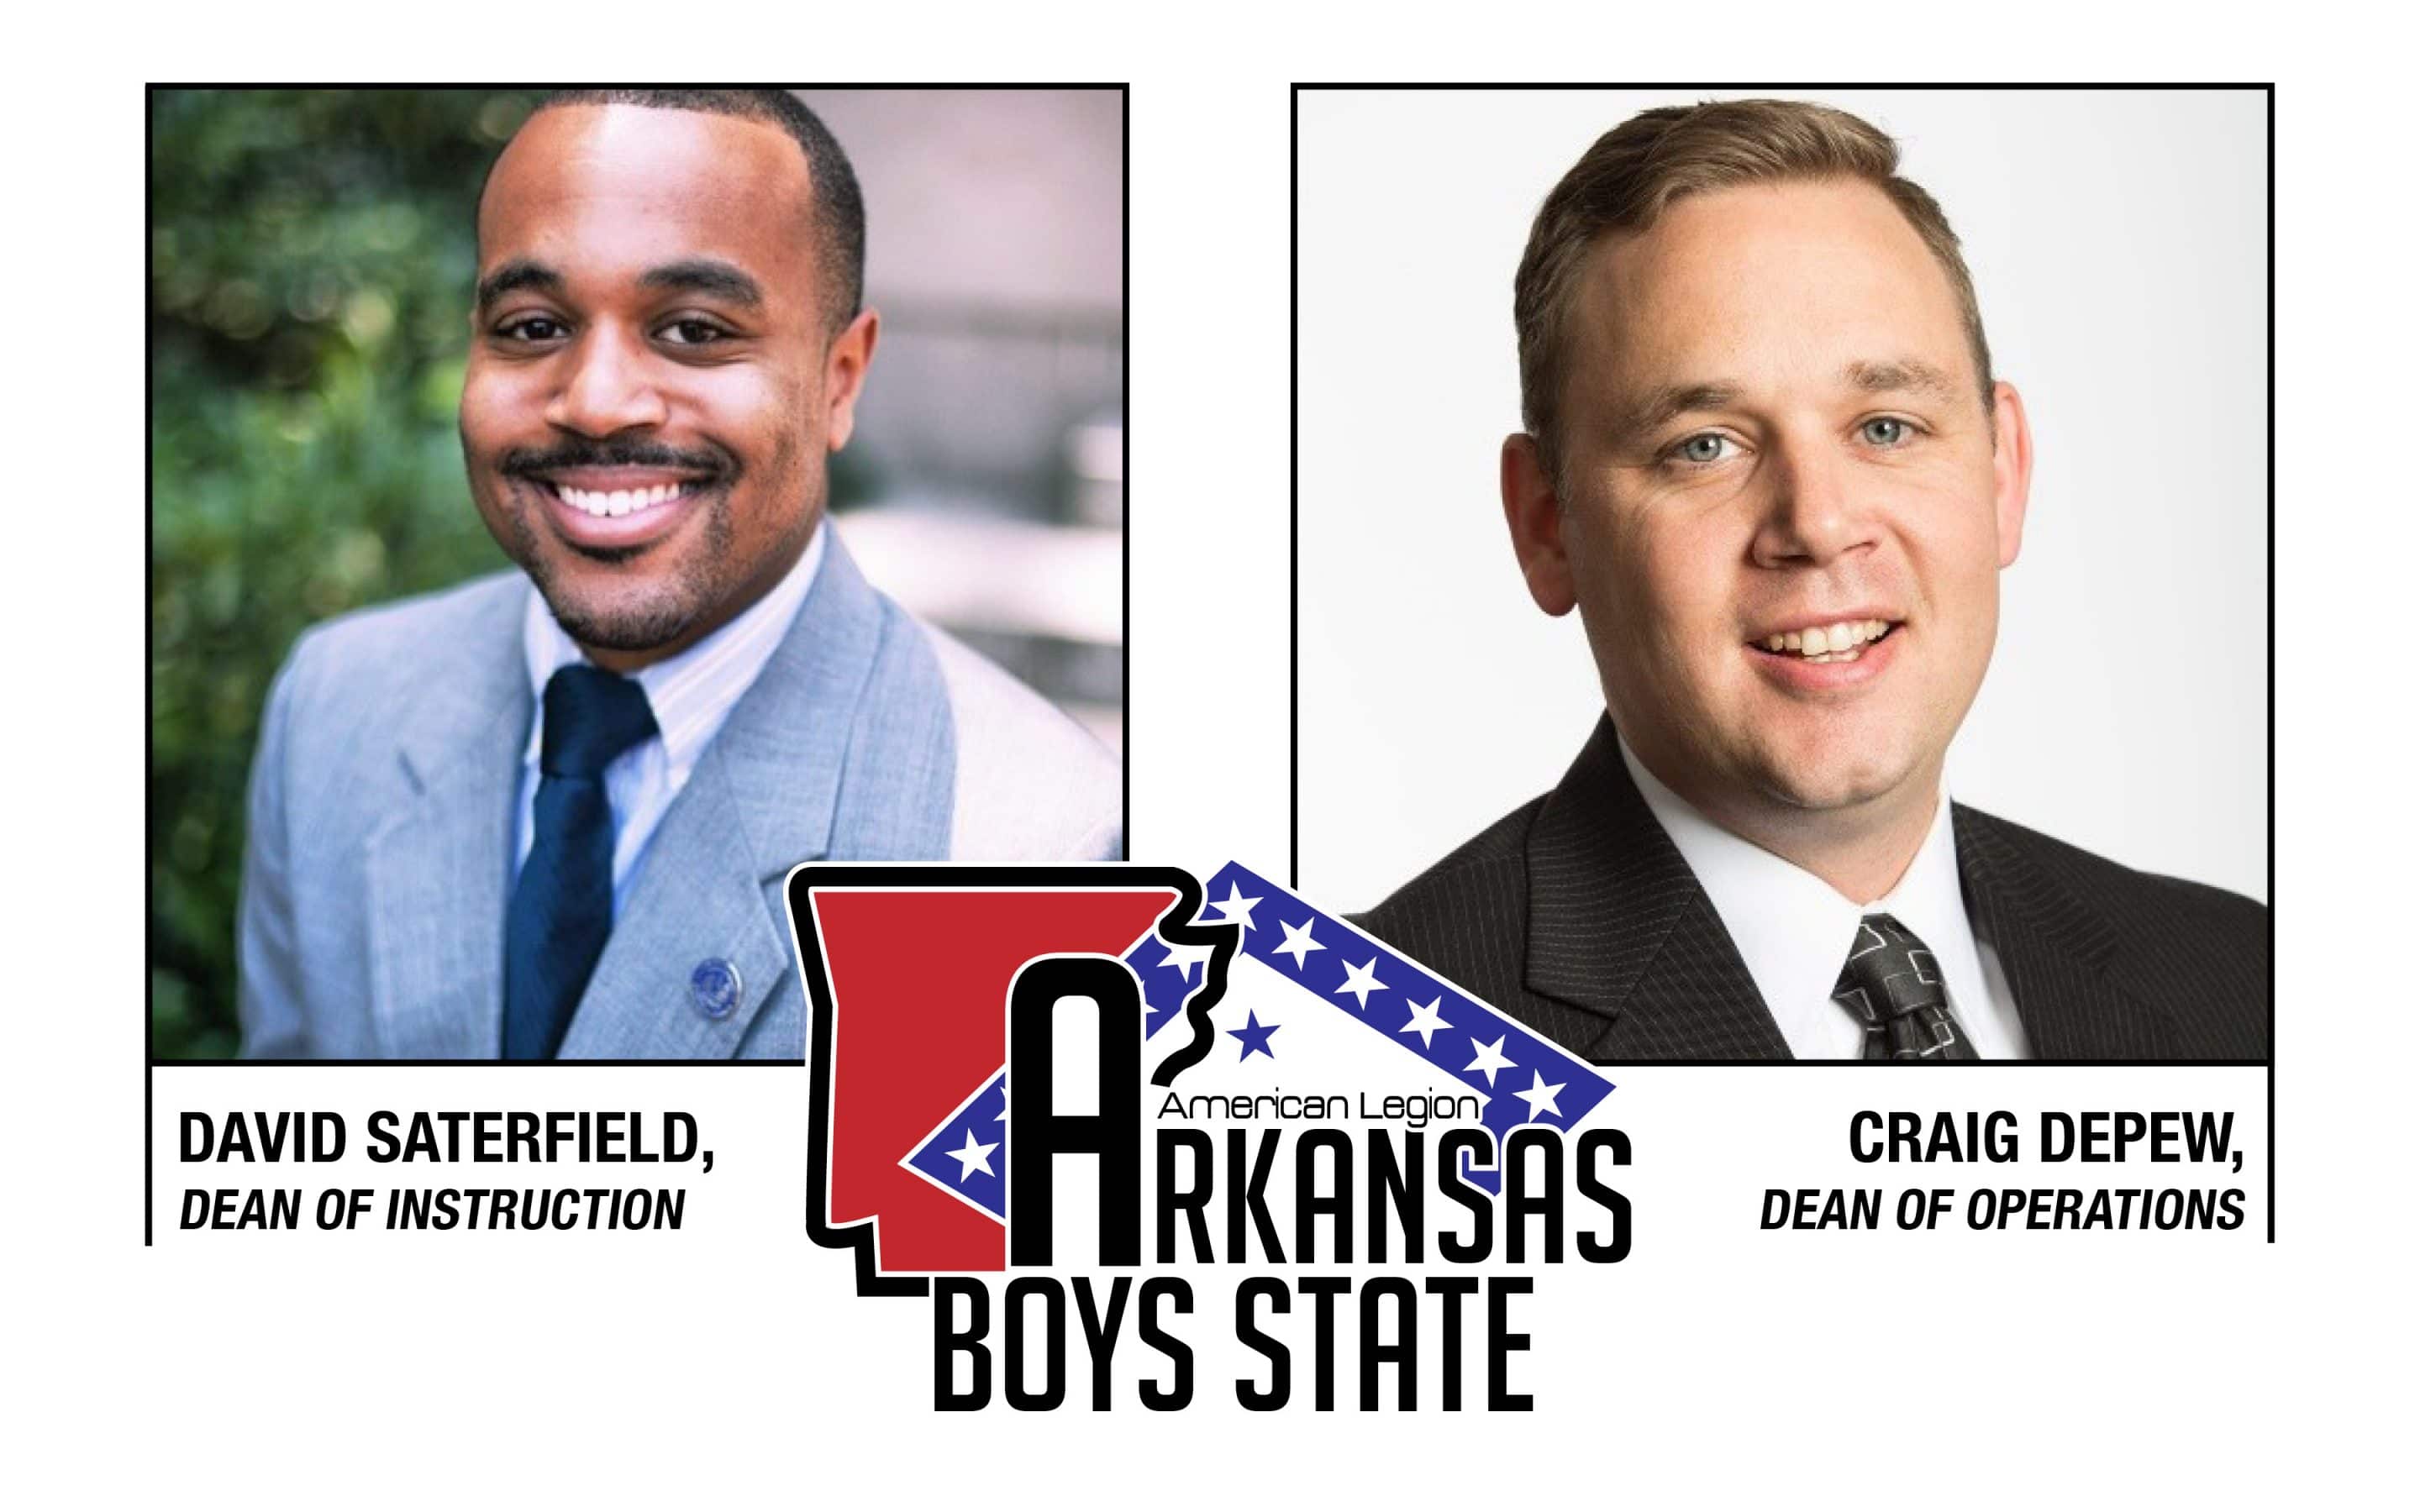 Depew and Saterfield appointed to new leadership for Arkansas Boys State